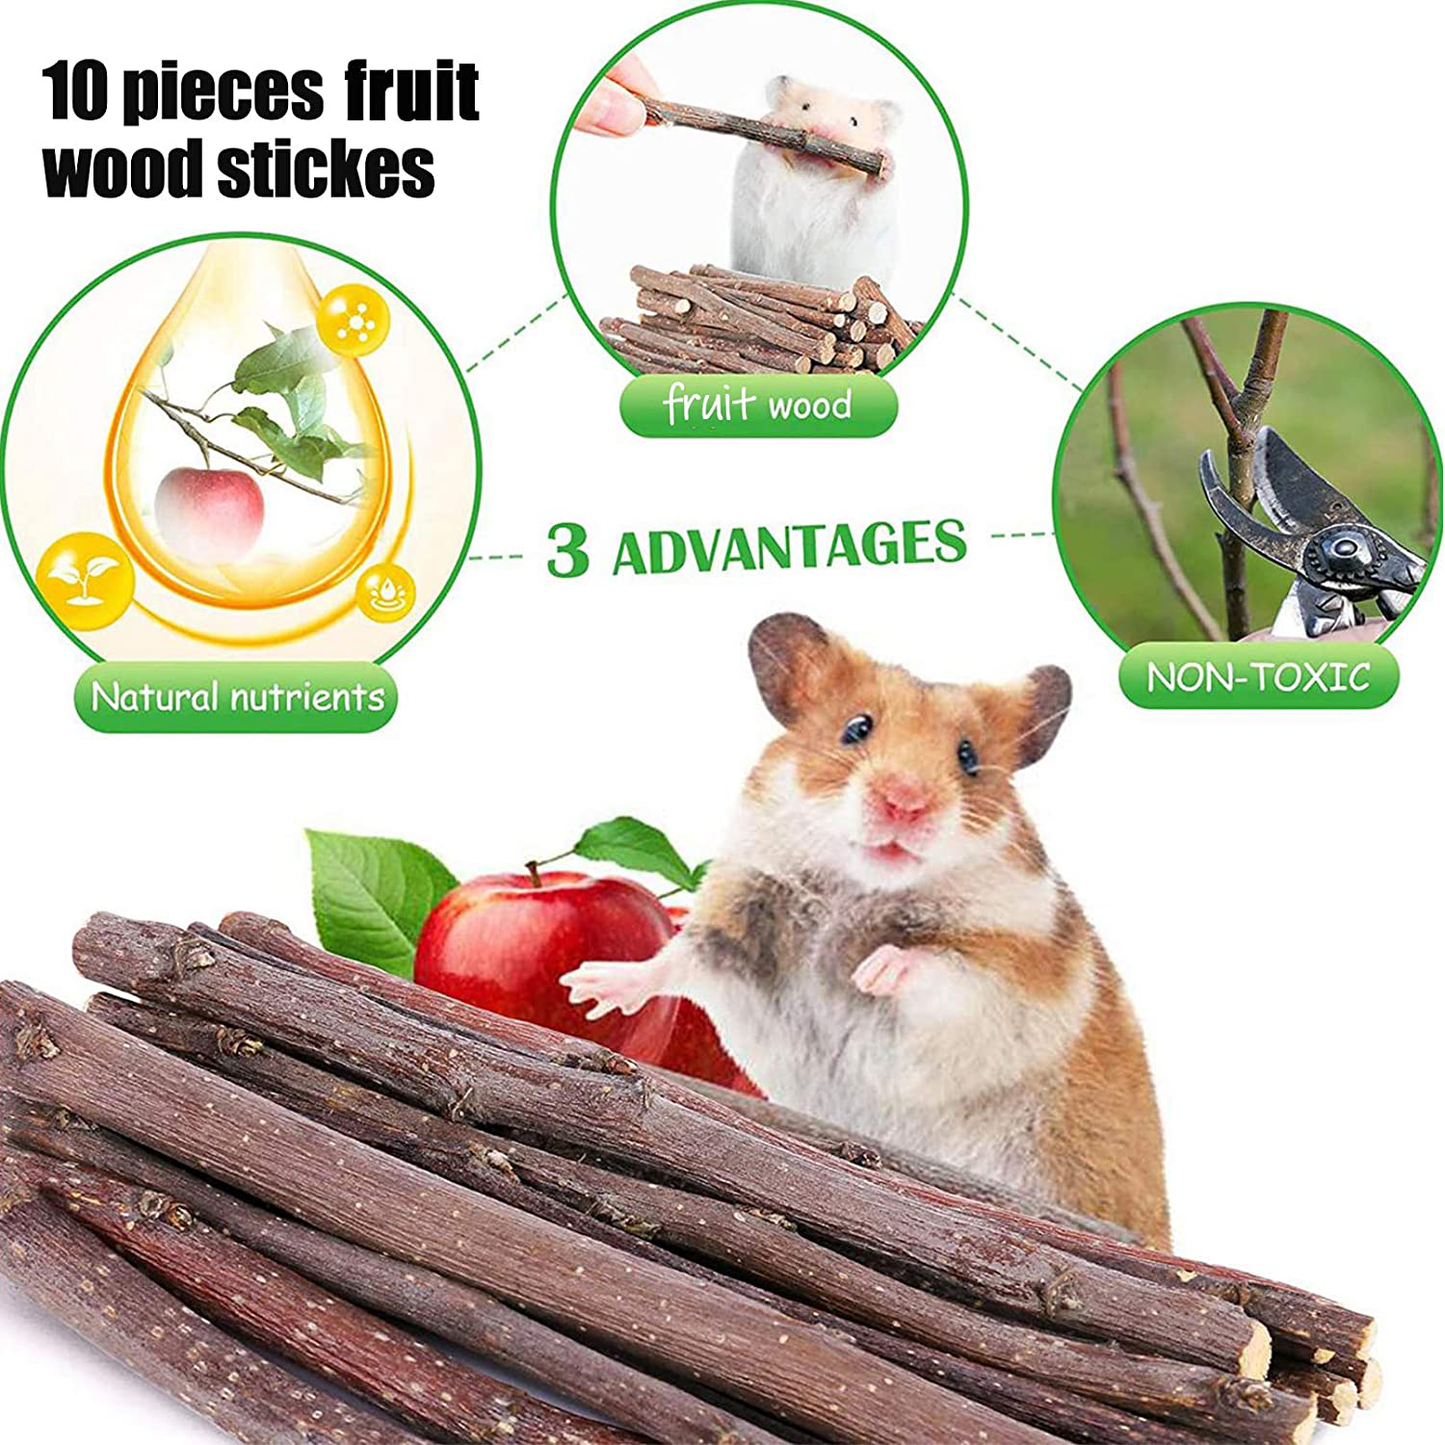 Hamiledyi Rabbit Grass Mat Woven Pet Bed Nature Hay Mat Chewing Play Toy Grass Mats Bunny Bedding Nest for Small Animal Guinea Pig Chinchilla Ferret Parrot Hamster (3Pack)